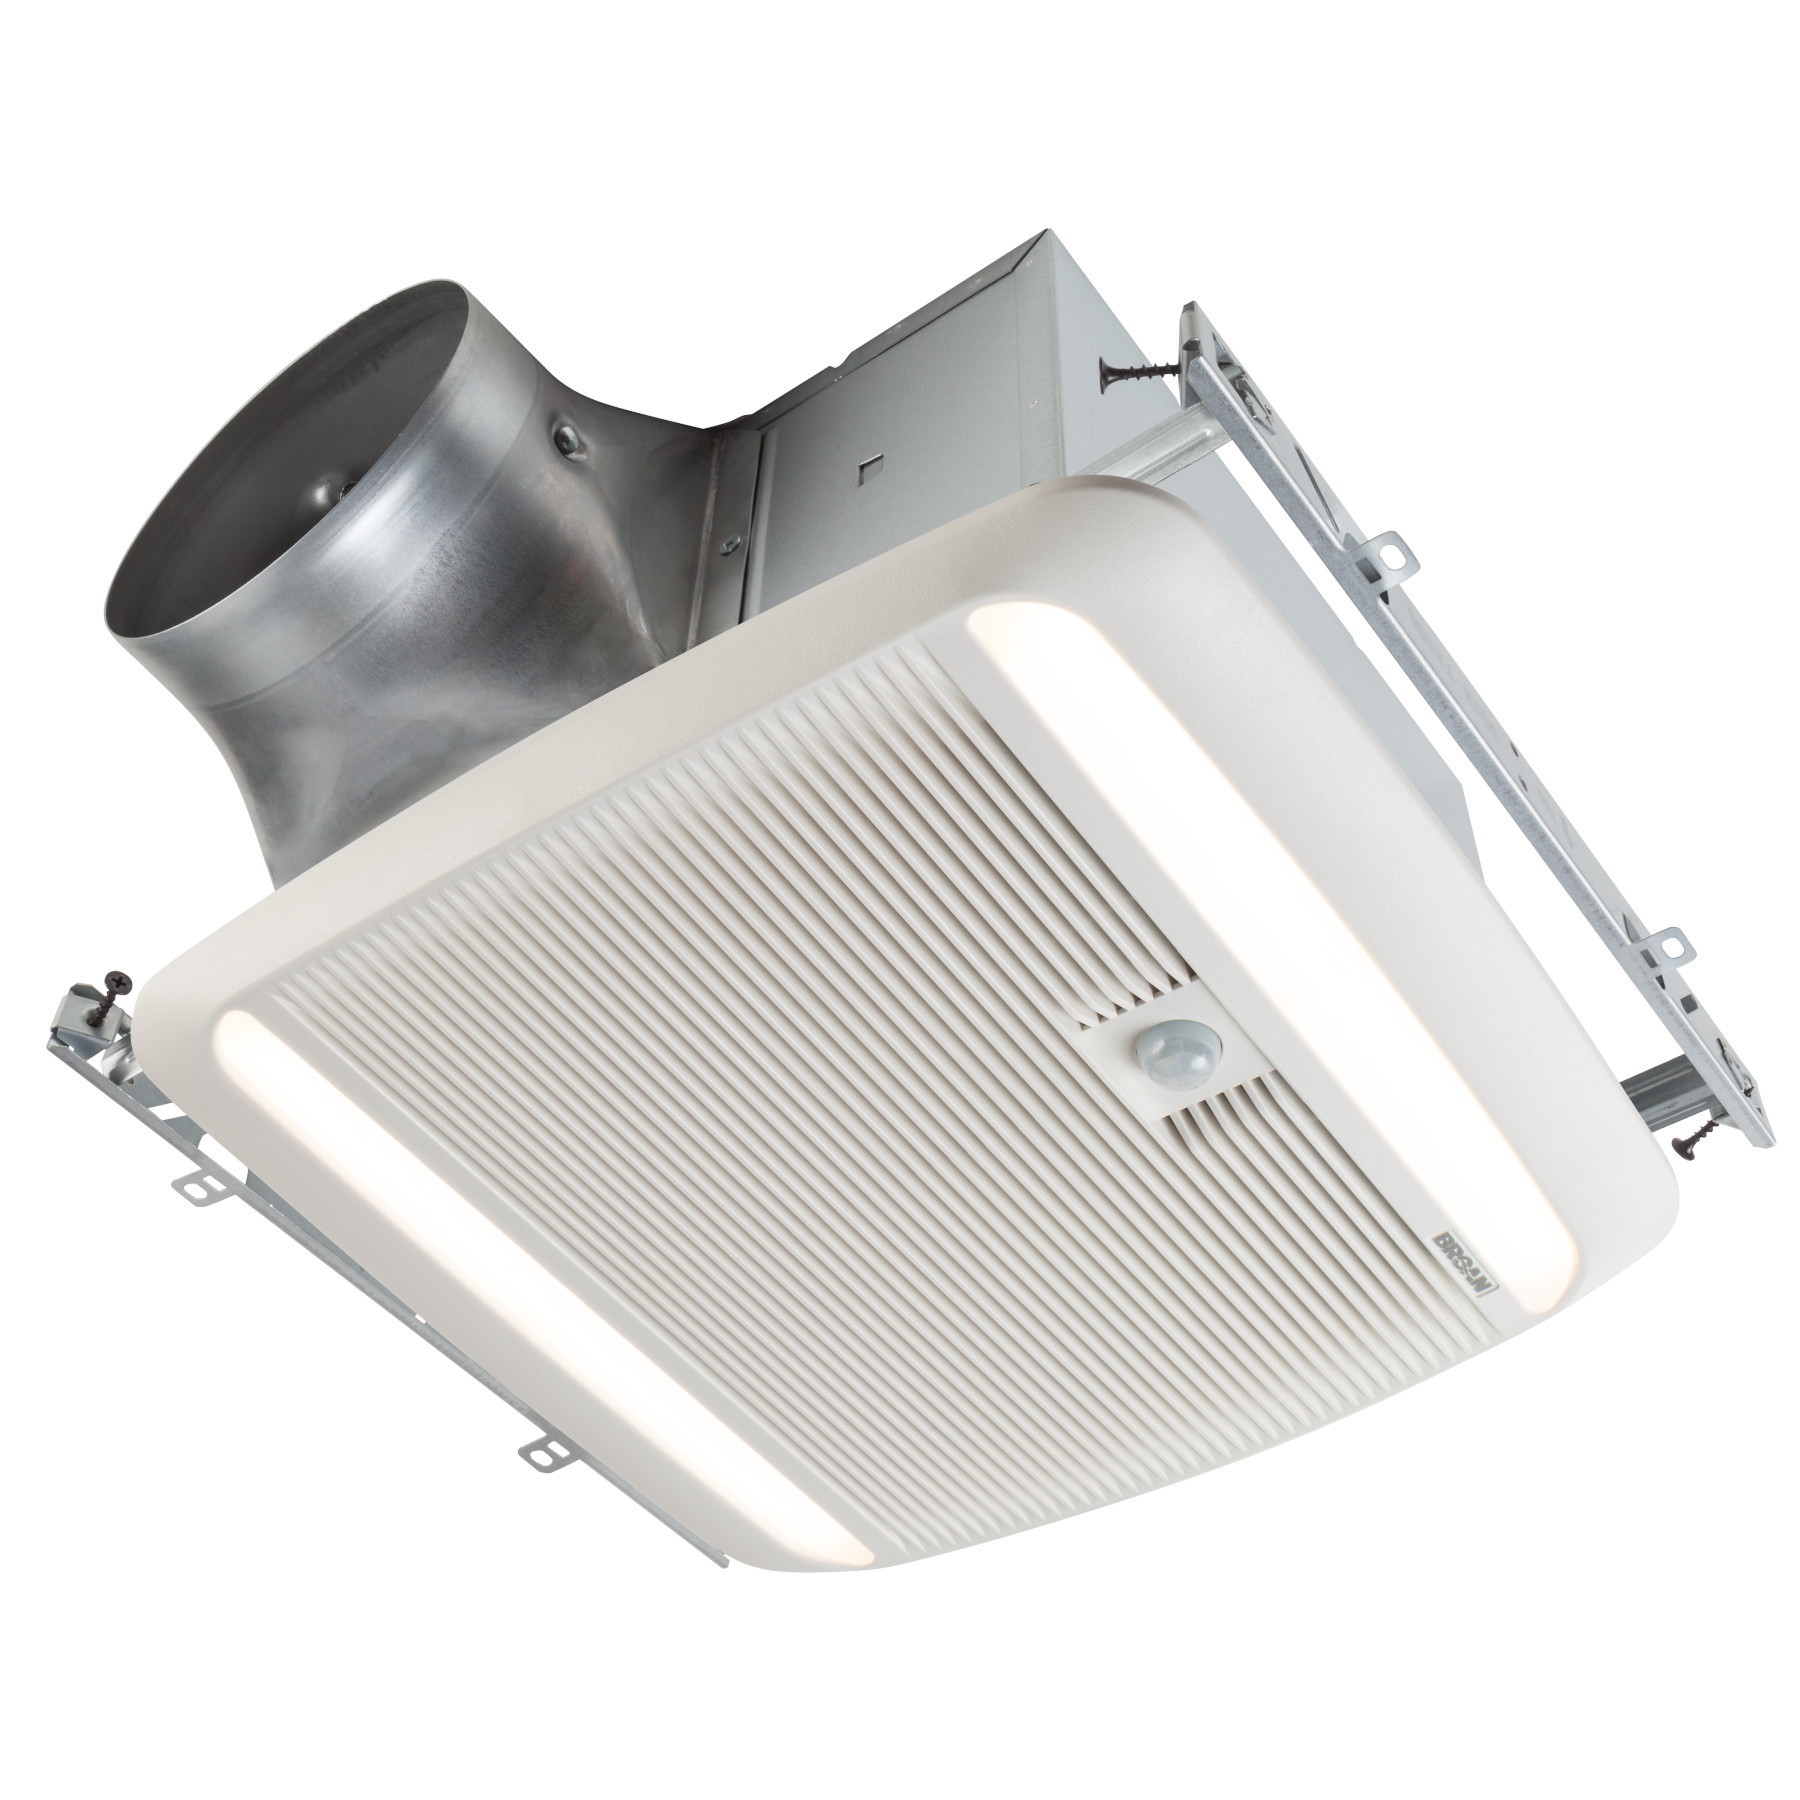 ULTRA GREEN ZB Series 110 CFM Multi-Speed Bathroom Exhaust Fan with LED Light and Motion Sensing, ENERGY STAR® certified